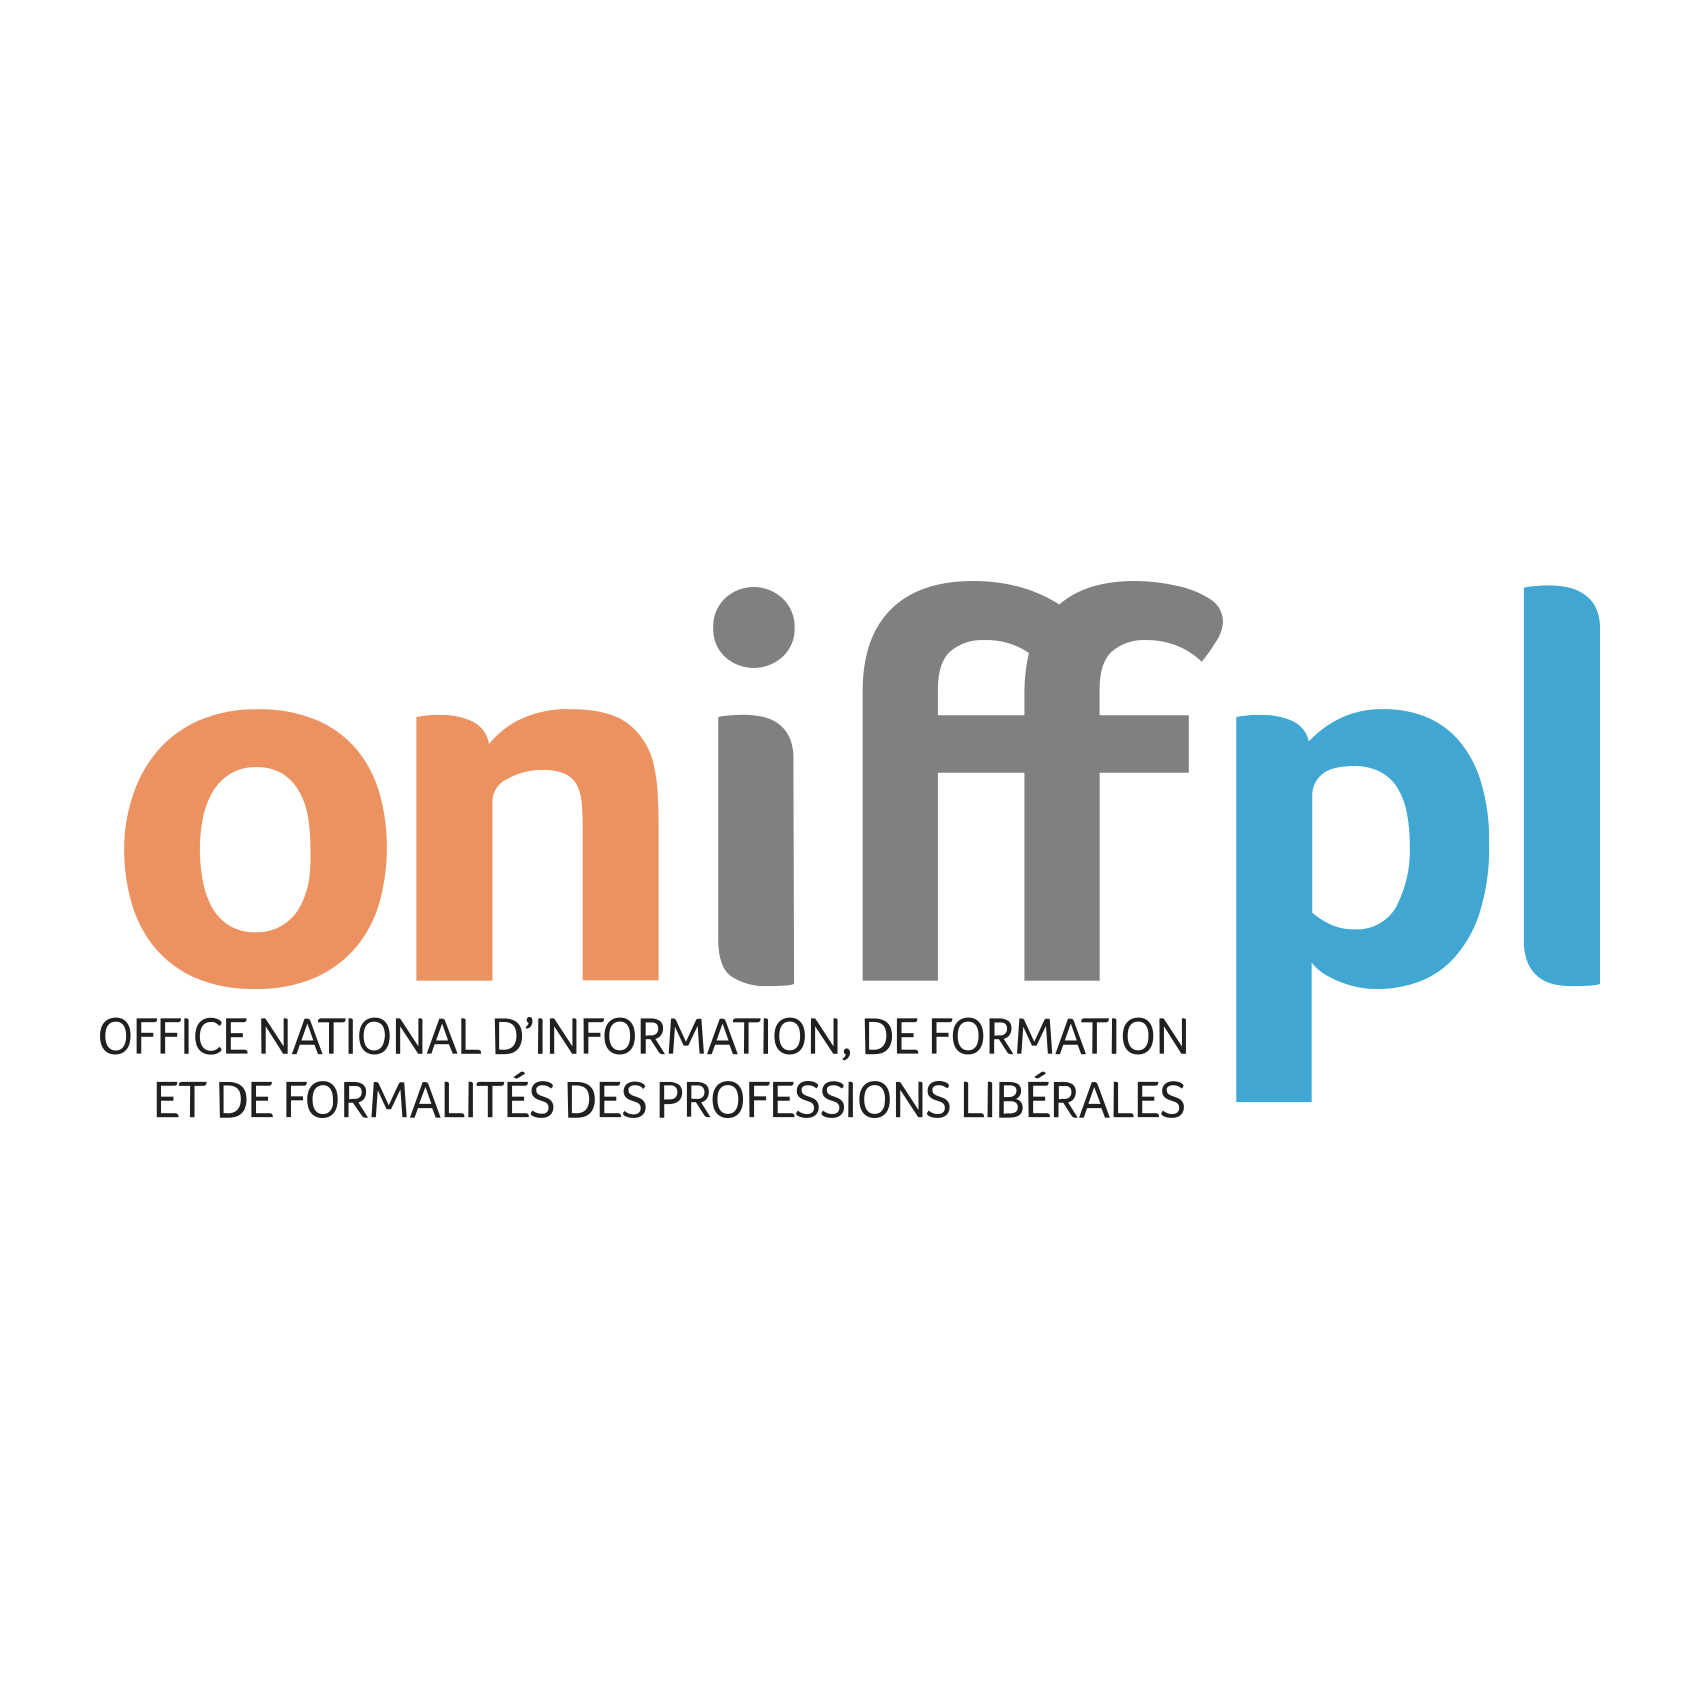 /files/oniff-pl/oniff-pl-formation/logos/oniffpl_logo-61a5eebfb0ae5.png